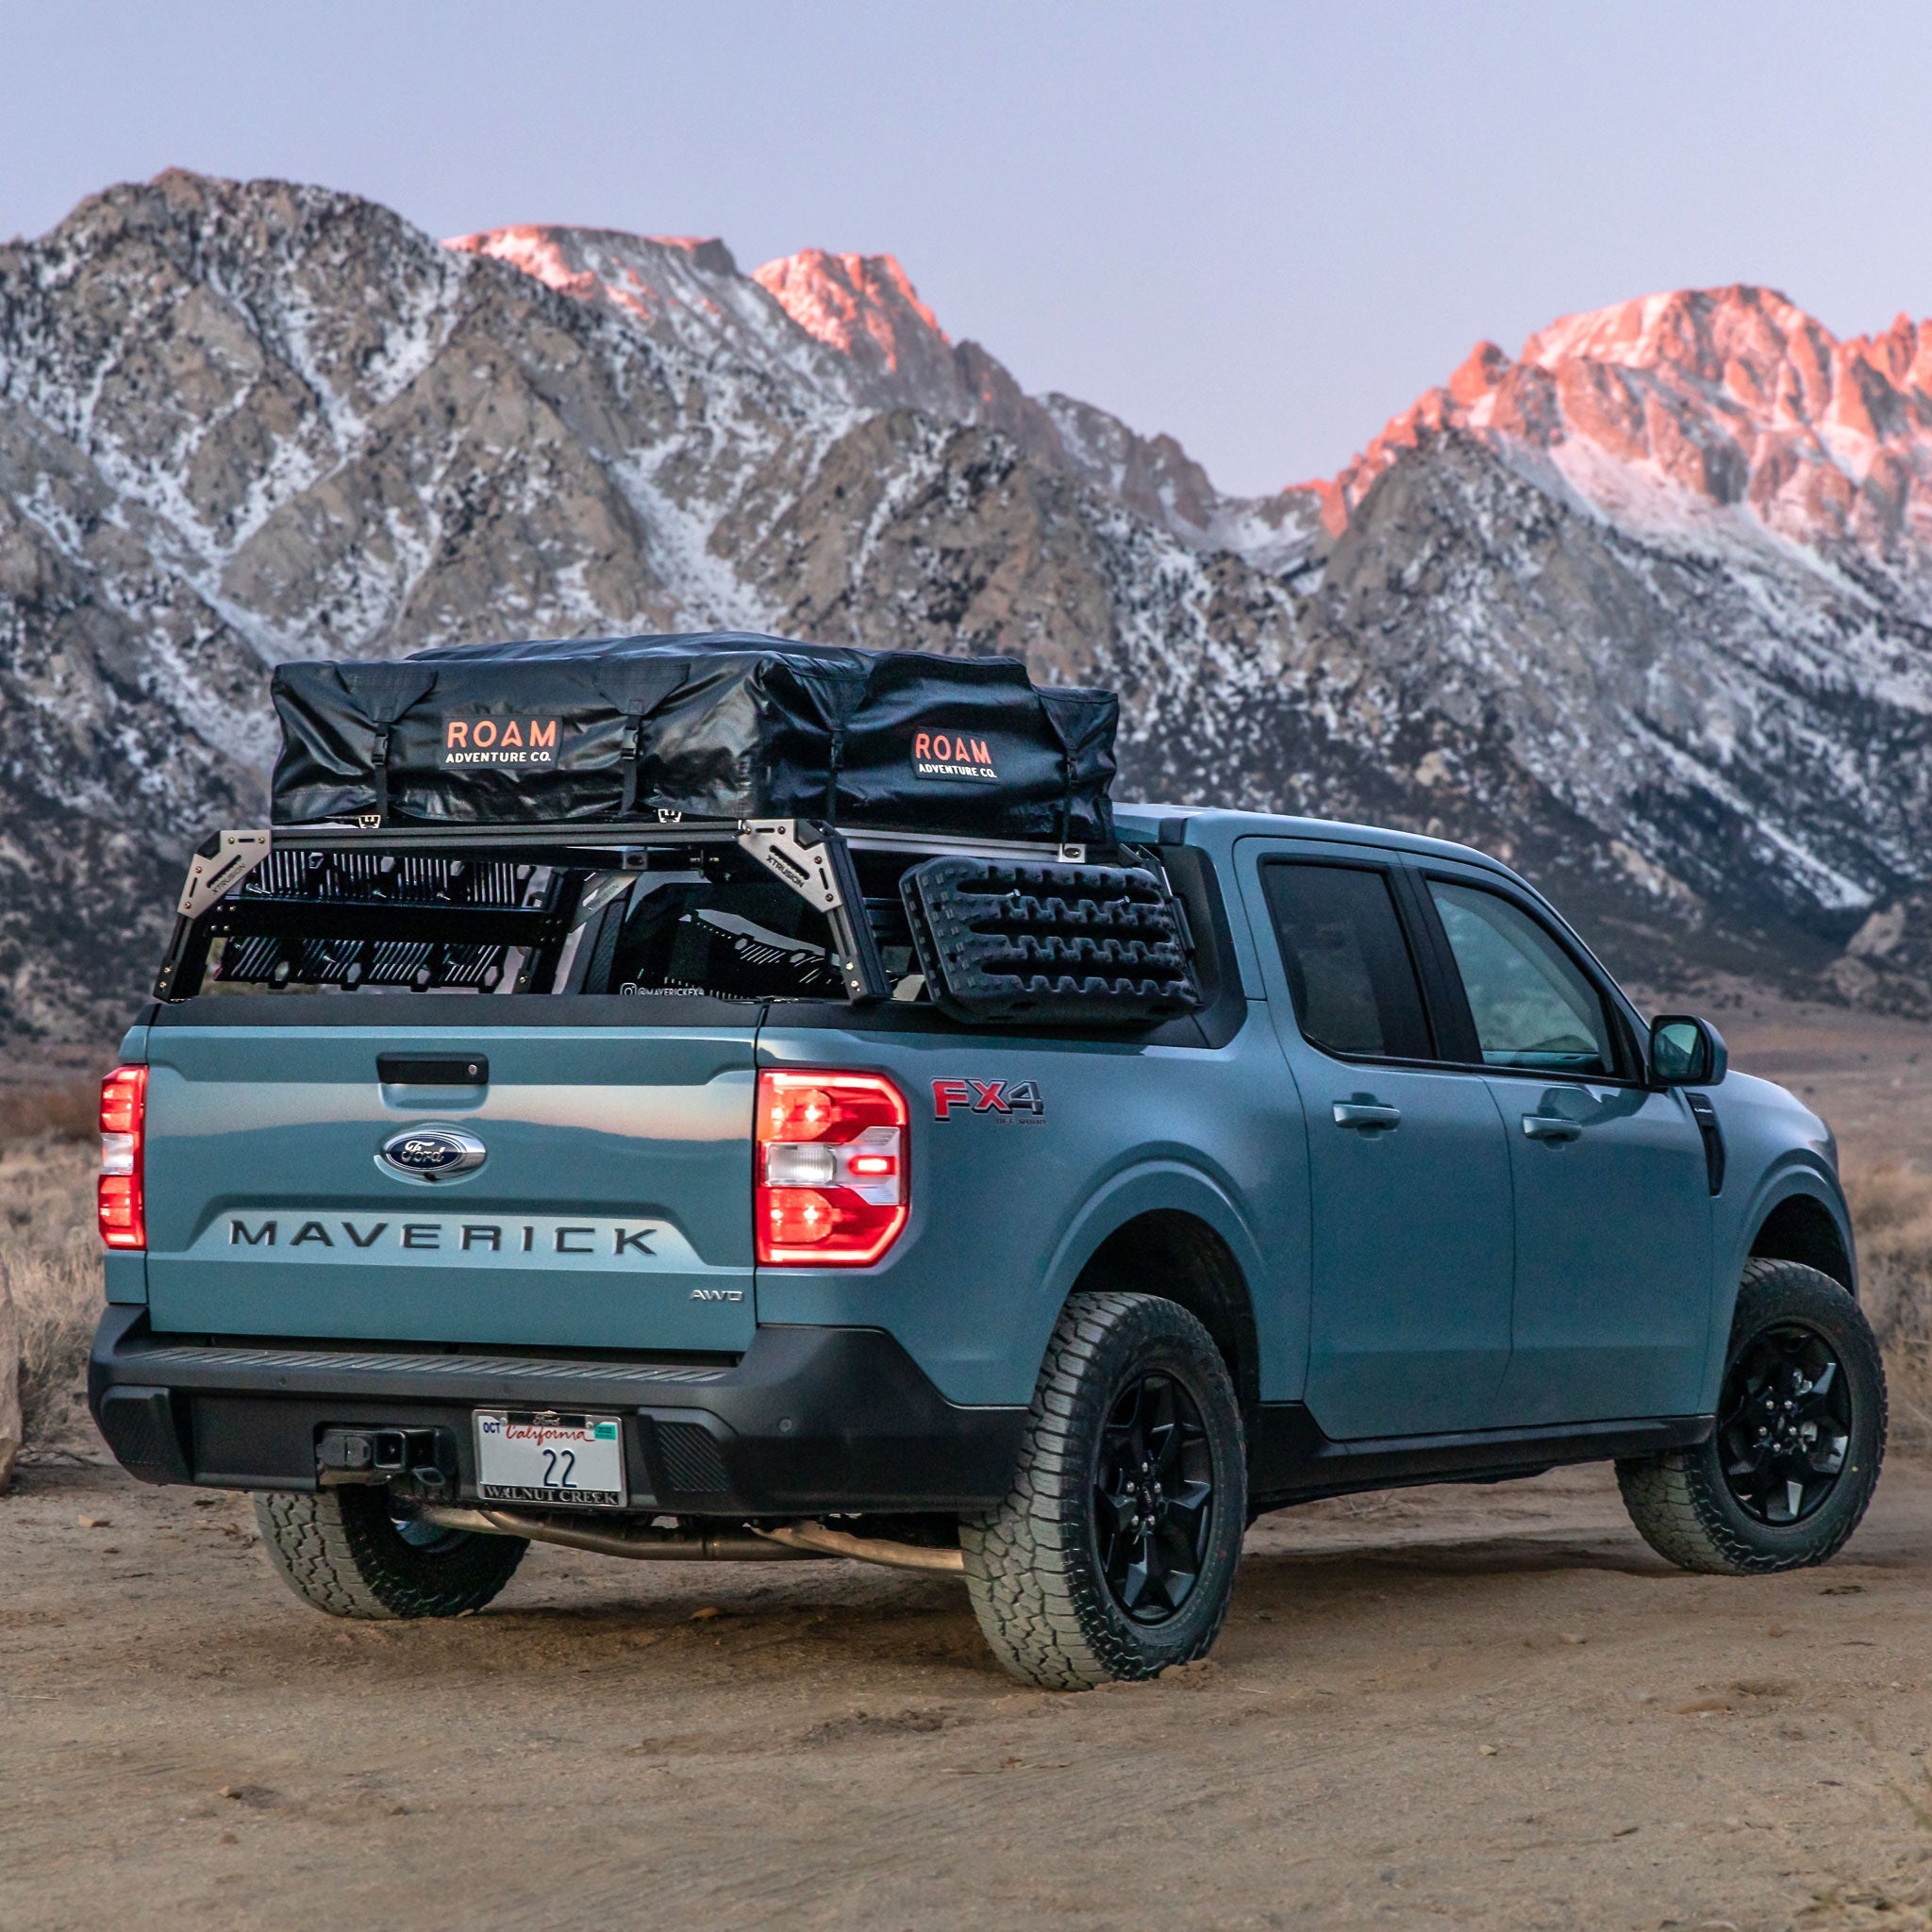 Ford Maverick FX4 with extrusion overland bed rack and roof top tent RTT